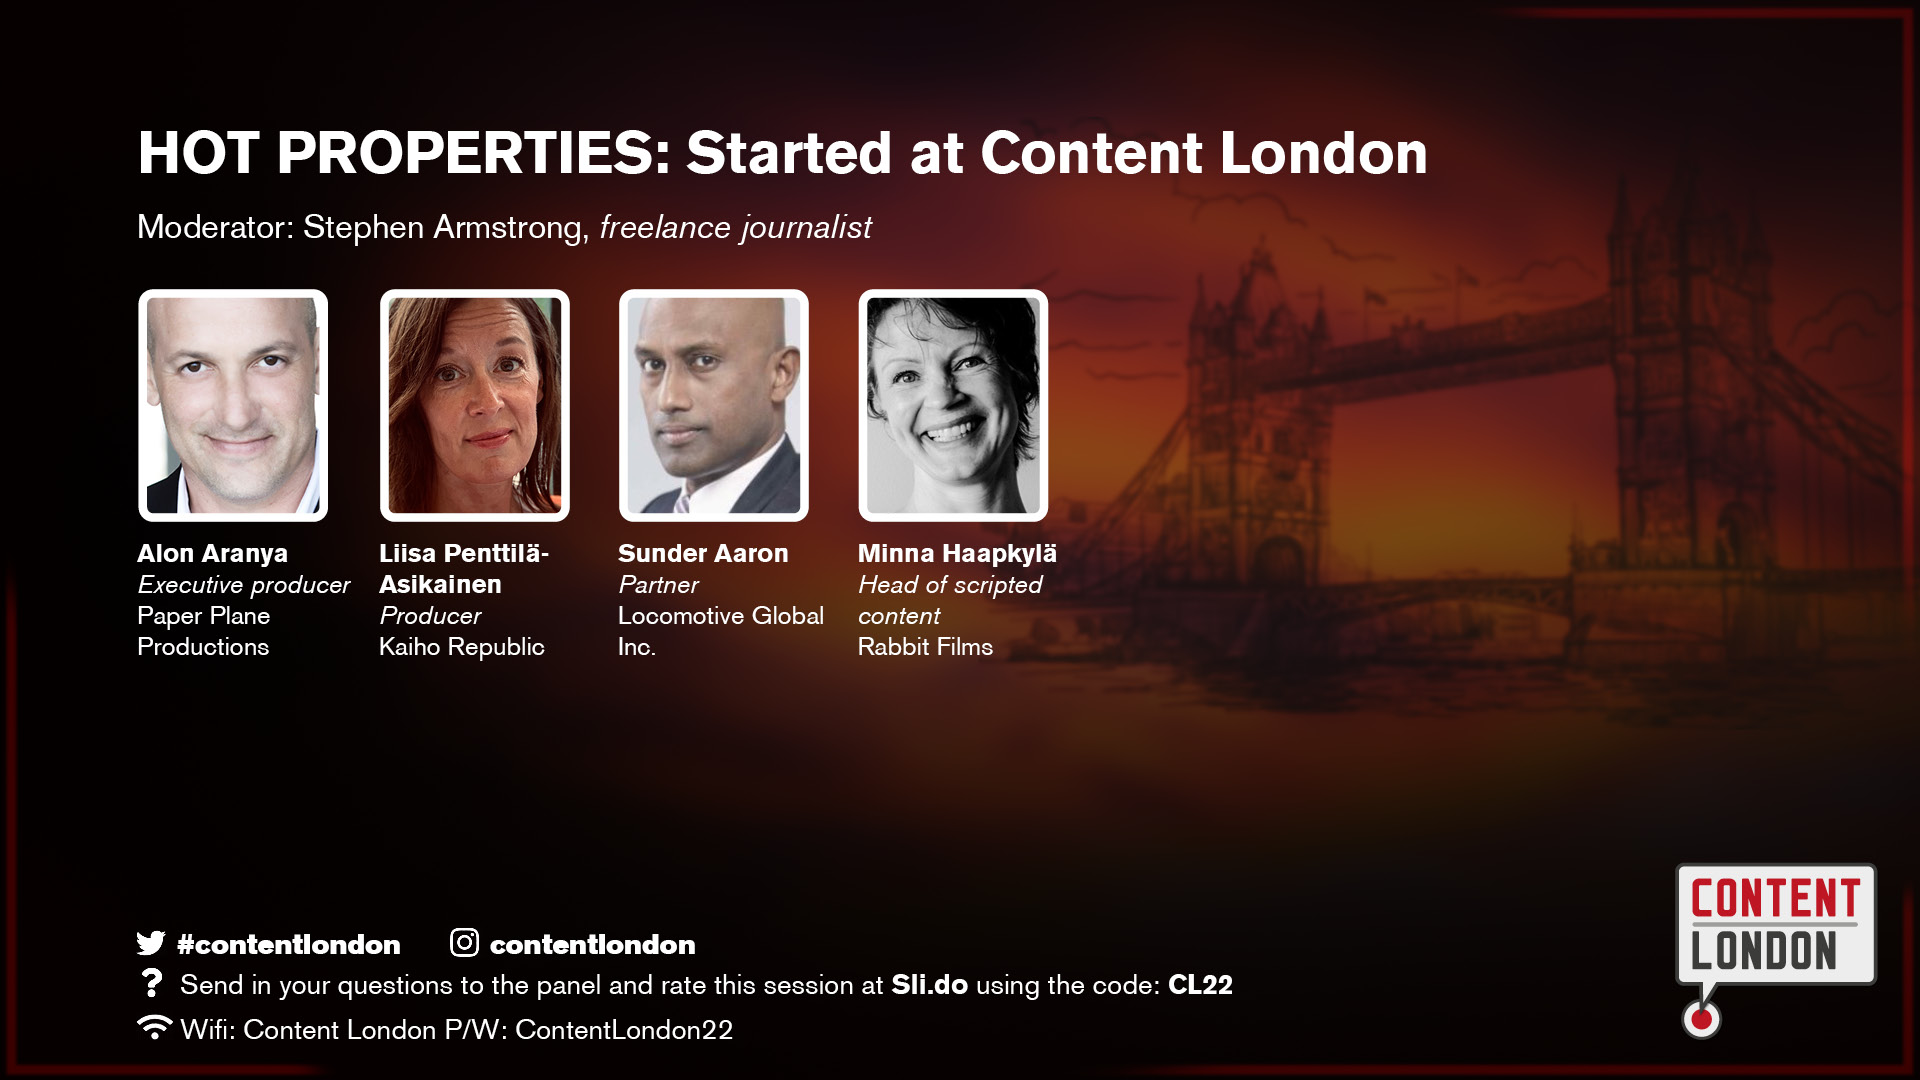 HOT PROPERTIES: Started at Content London